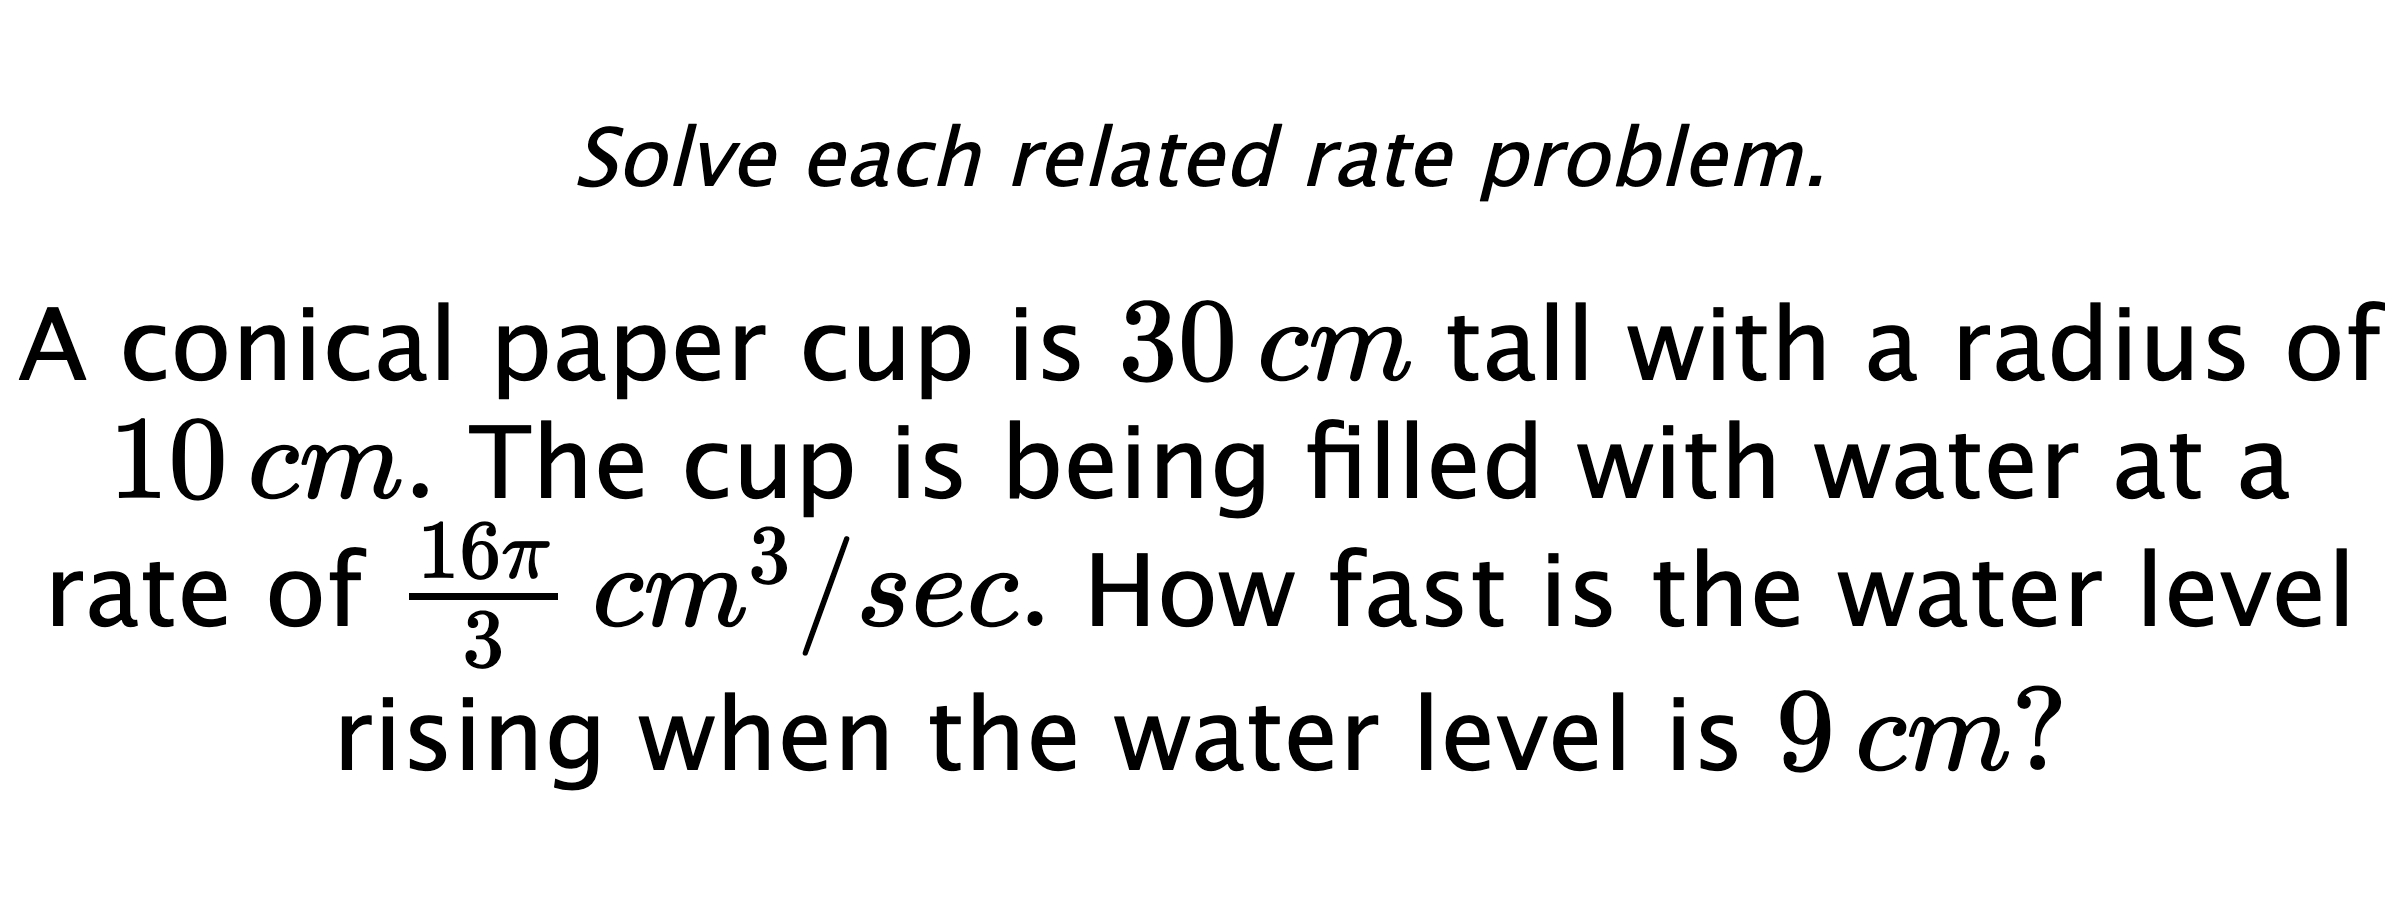 Solve each related rate problem. A conical paper cup is $30\,cm$ tall with a radius of $10\,cm.$ The cup is being filled with water at a rate of $\frac{16\pi}{3} \,cm^{3}/sec.$ How fast is the water level rising when the water level is $9\,cm?$